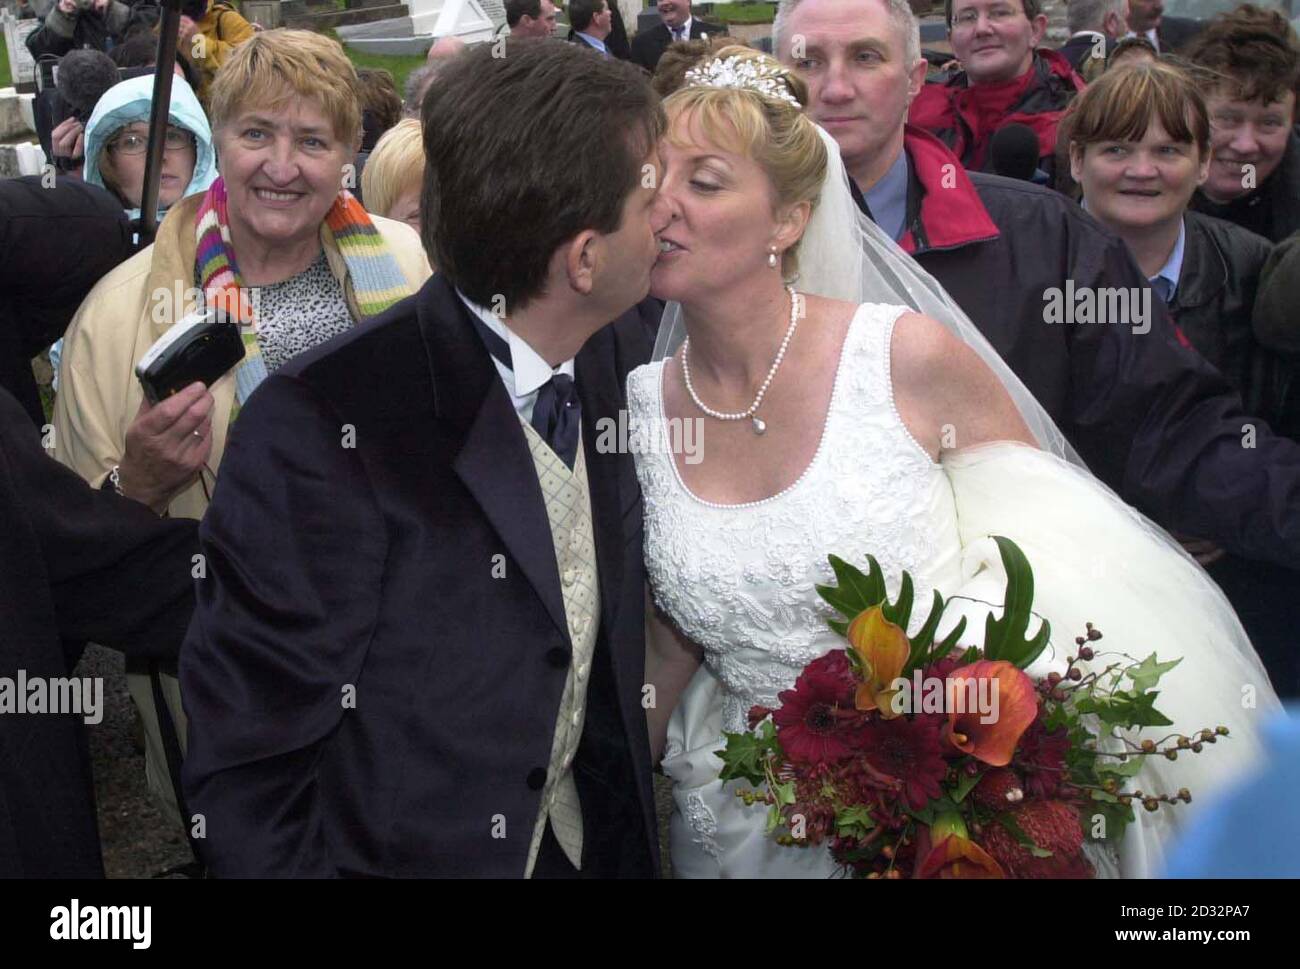 Irish country singer Daniel O'Donnell kisses his bride, Majella McLennan, outside St Mary's Church after they married, in Kincasslagh, Co. Donegal.  Some 550 guests, including friends, family and neighbours, attended the traditional wedding.  * ...  at the church on the water's edge in west Ireland as crowds of fan sought to congratulate the couple. Stock Photo